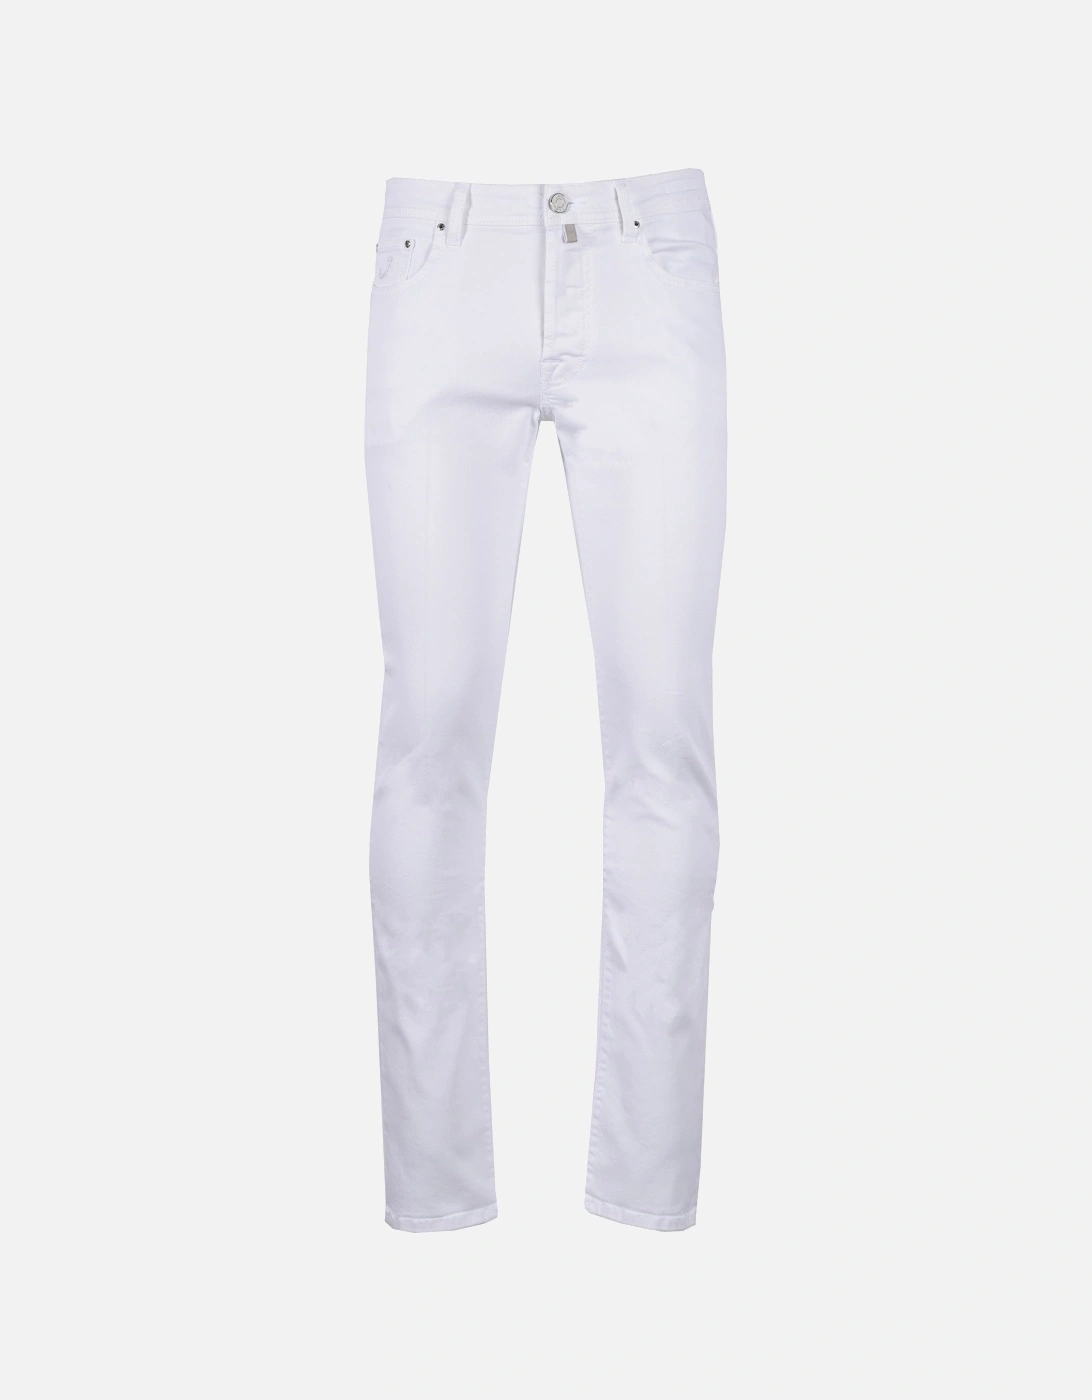 Bard Fit Jeans White